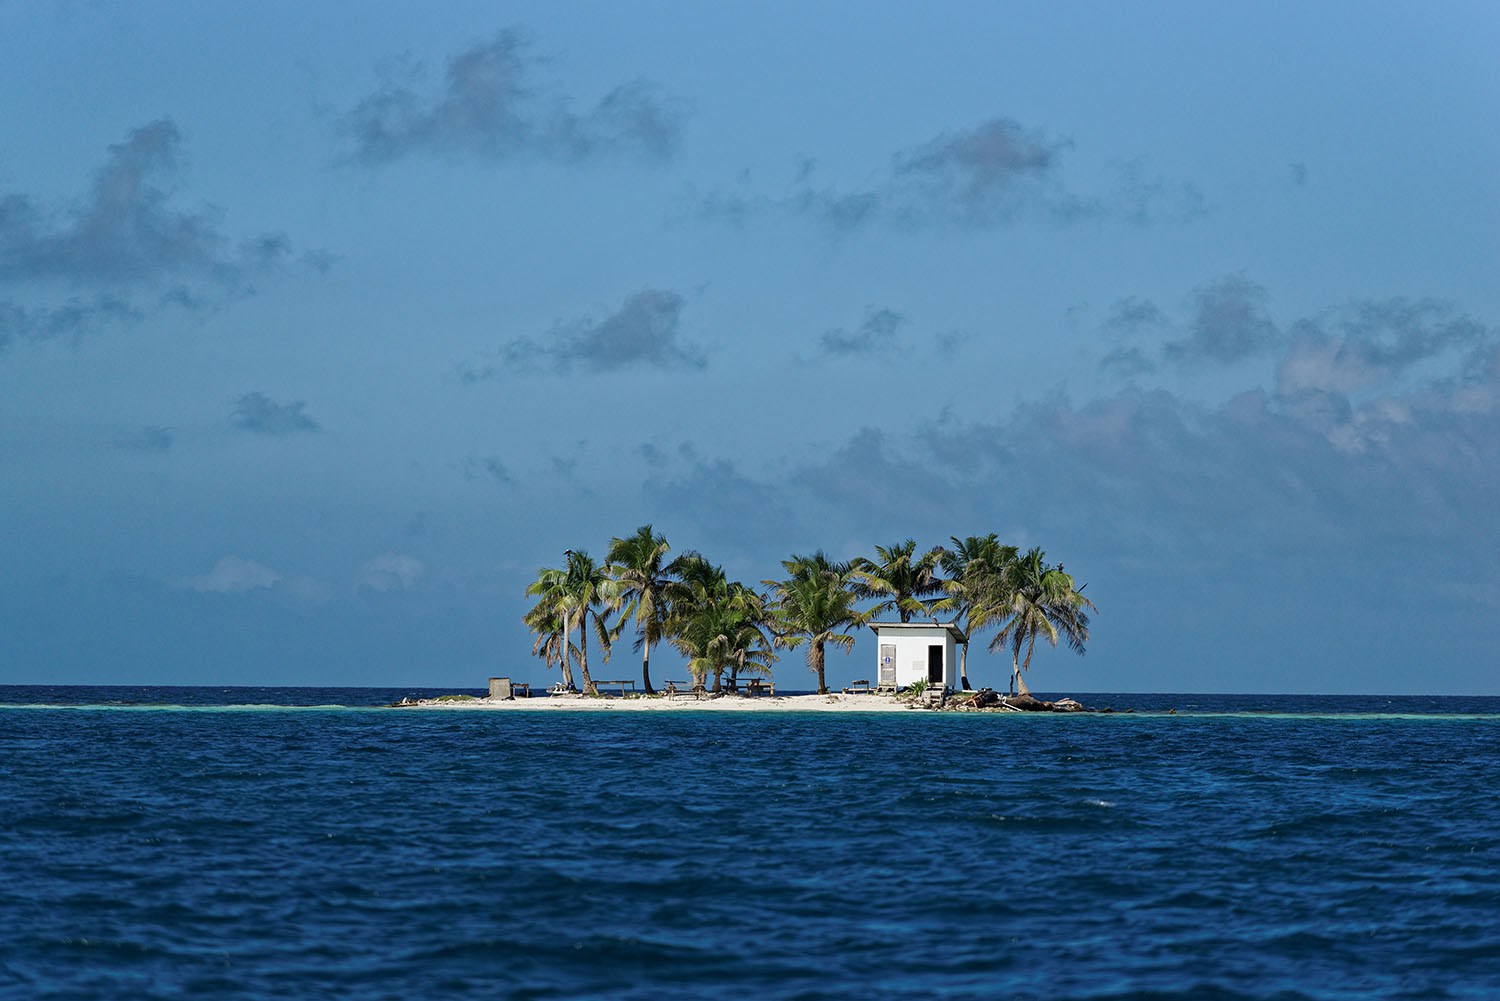 Little "Toilet island" in the middle of Caribbean sea (Belize, Placencia).